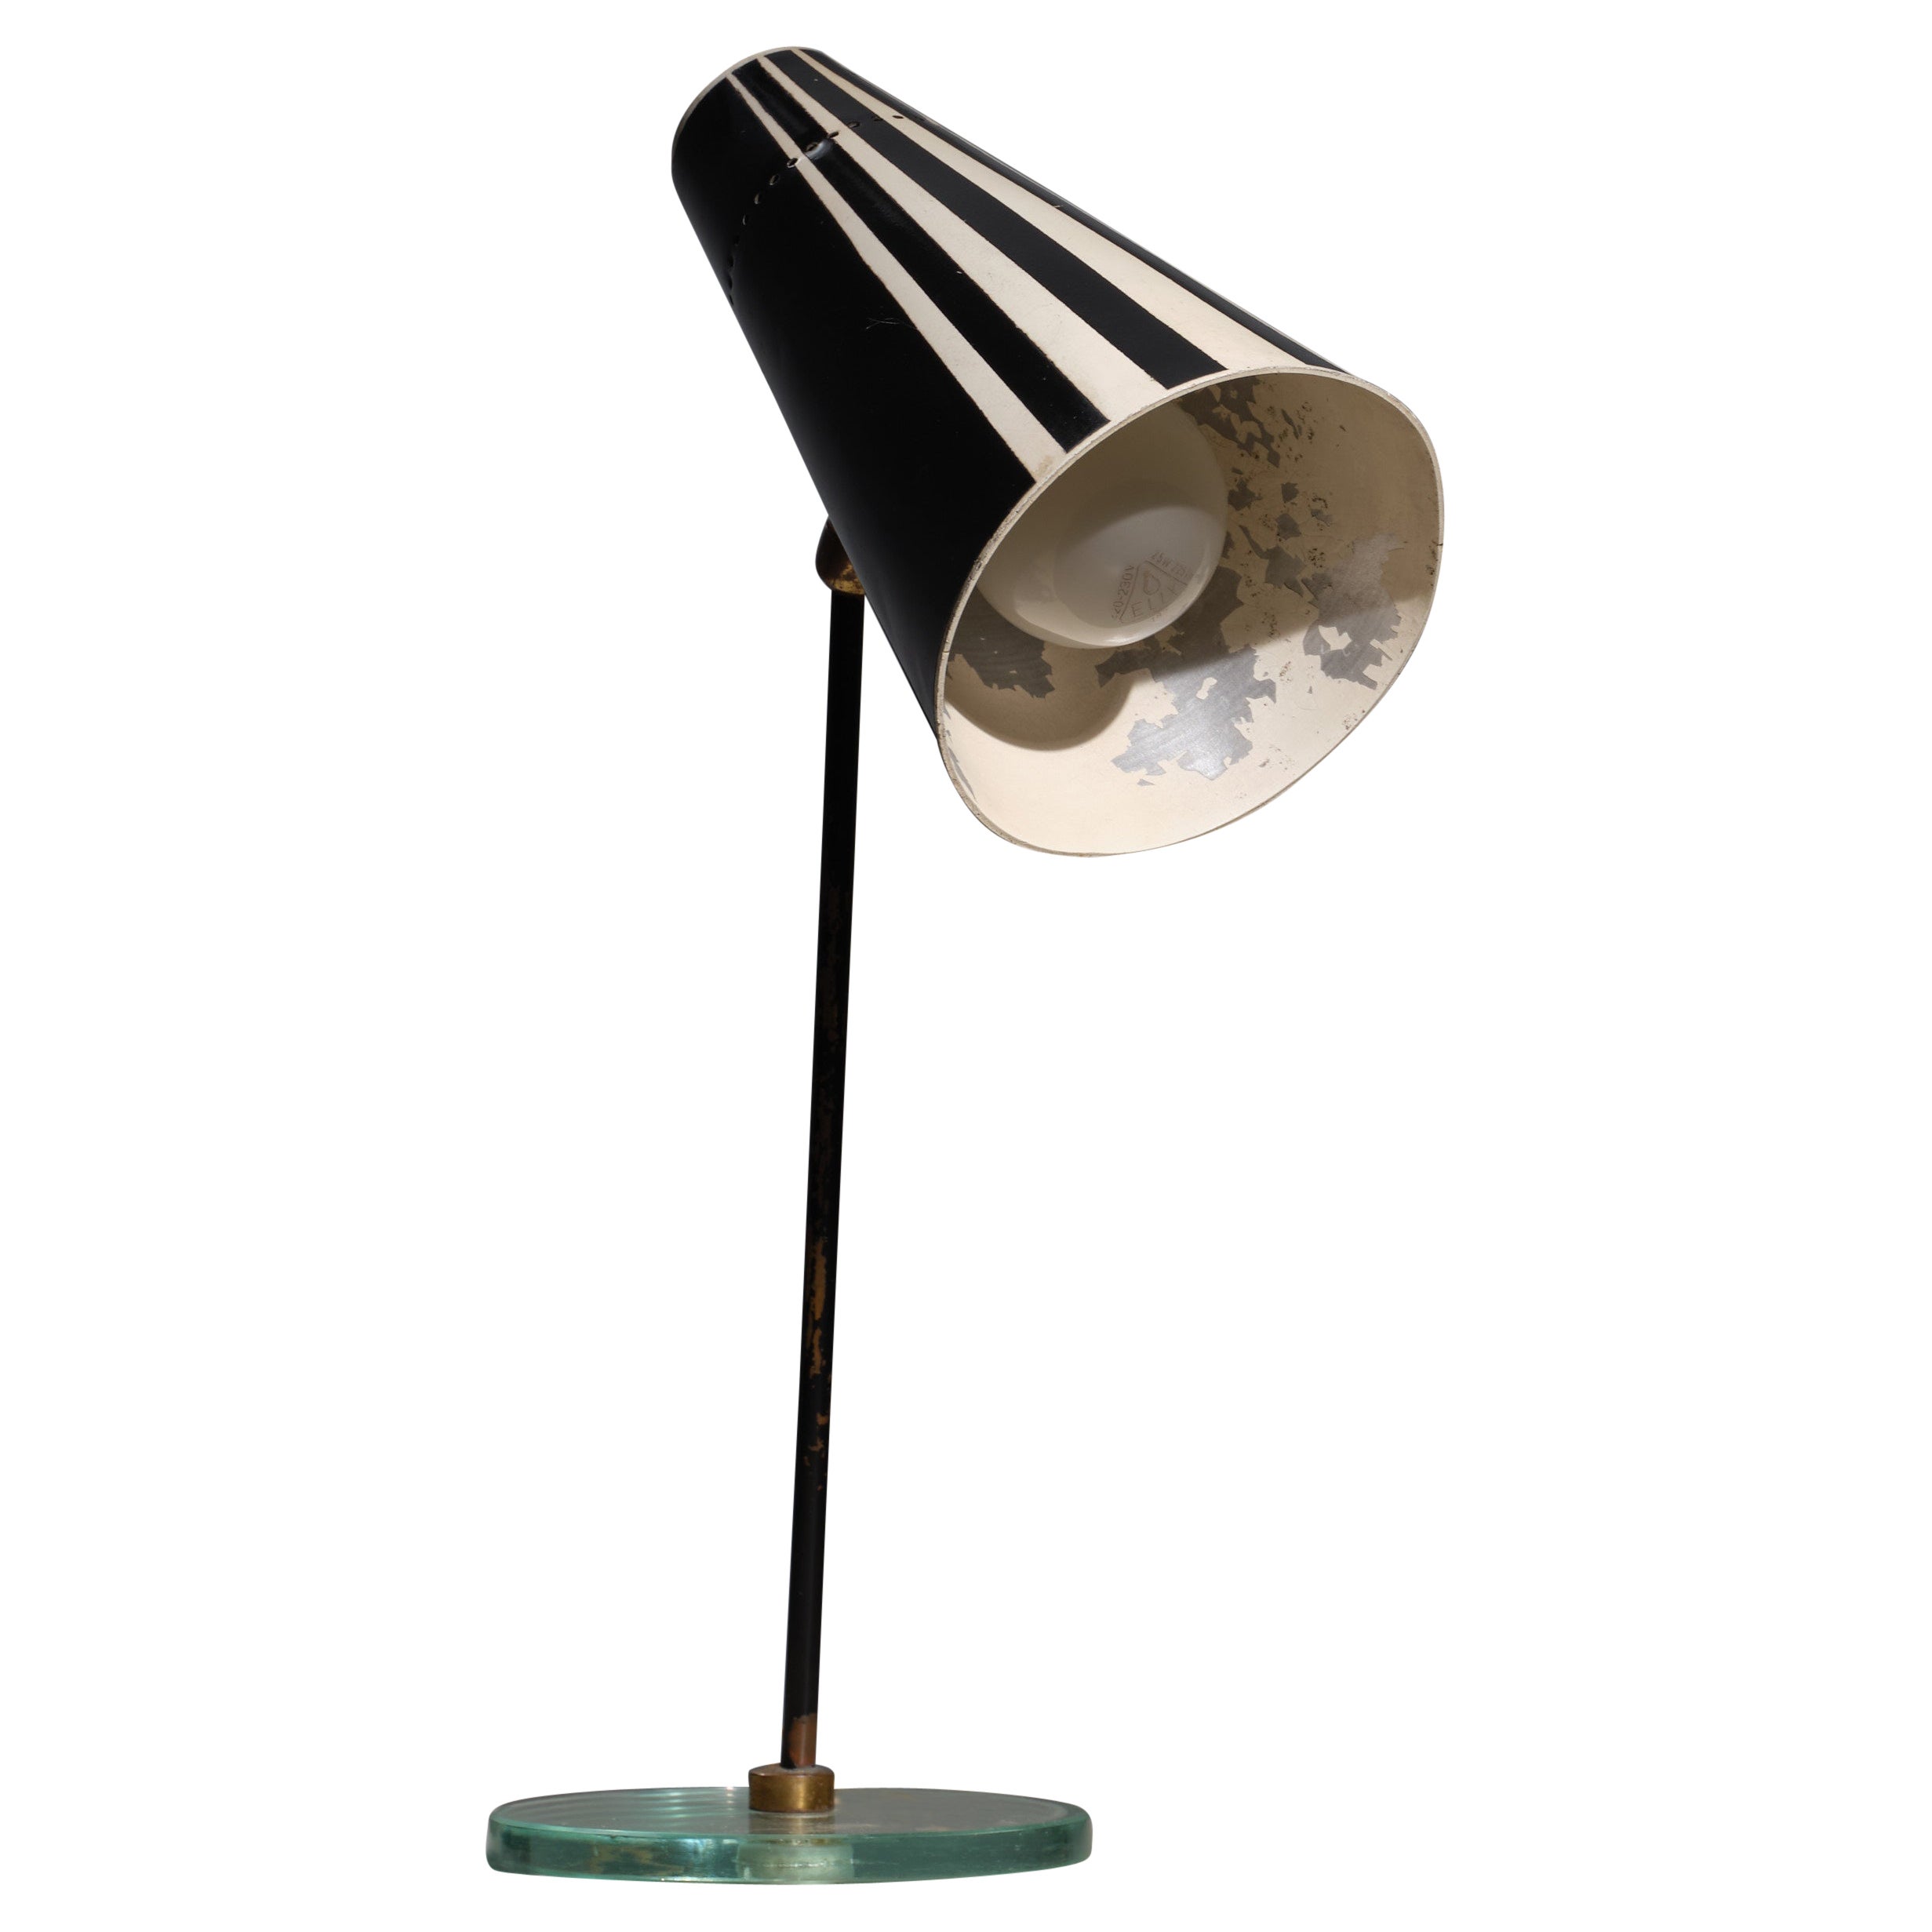 Italian 1950s Table Lamp, Exquisite Elegance in Enamel-Coated Steel and Brass